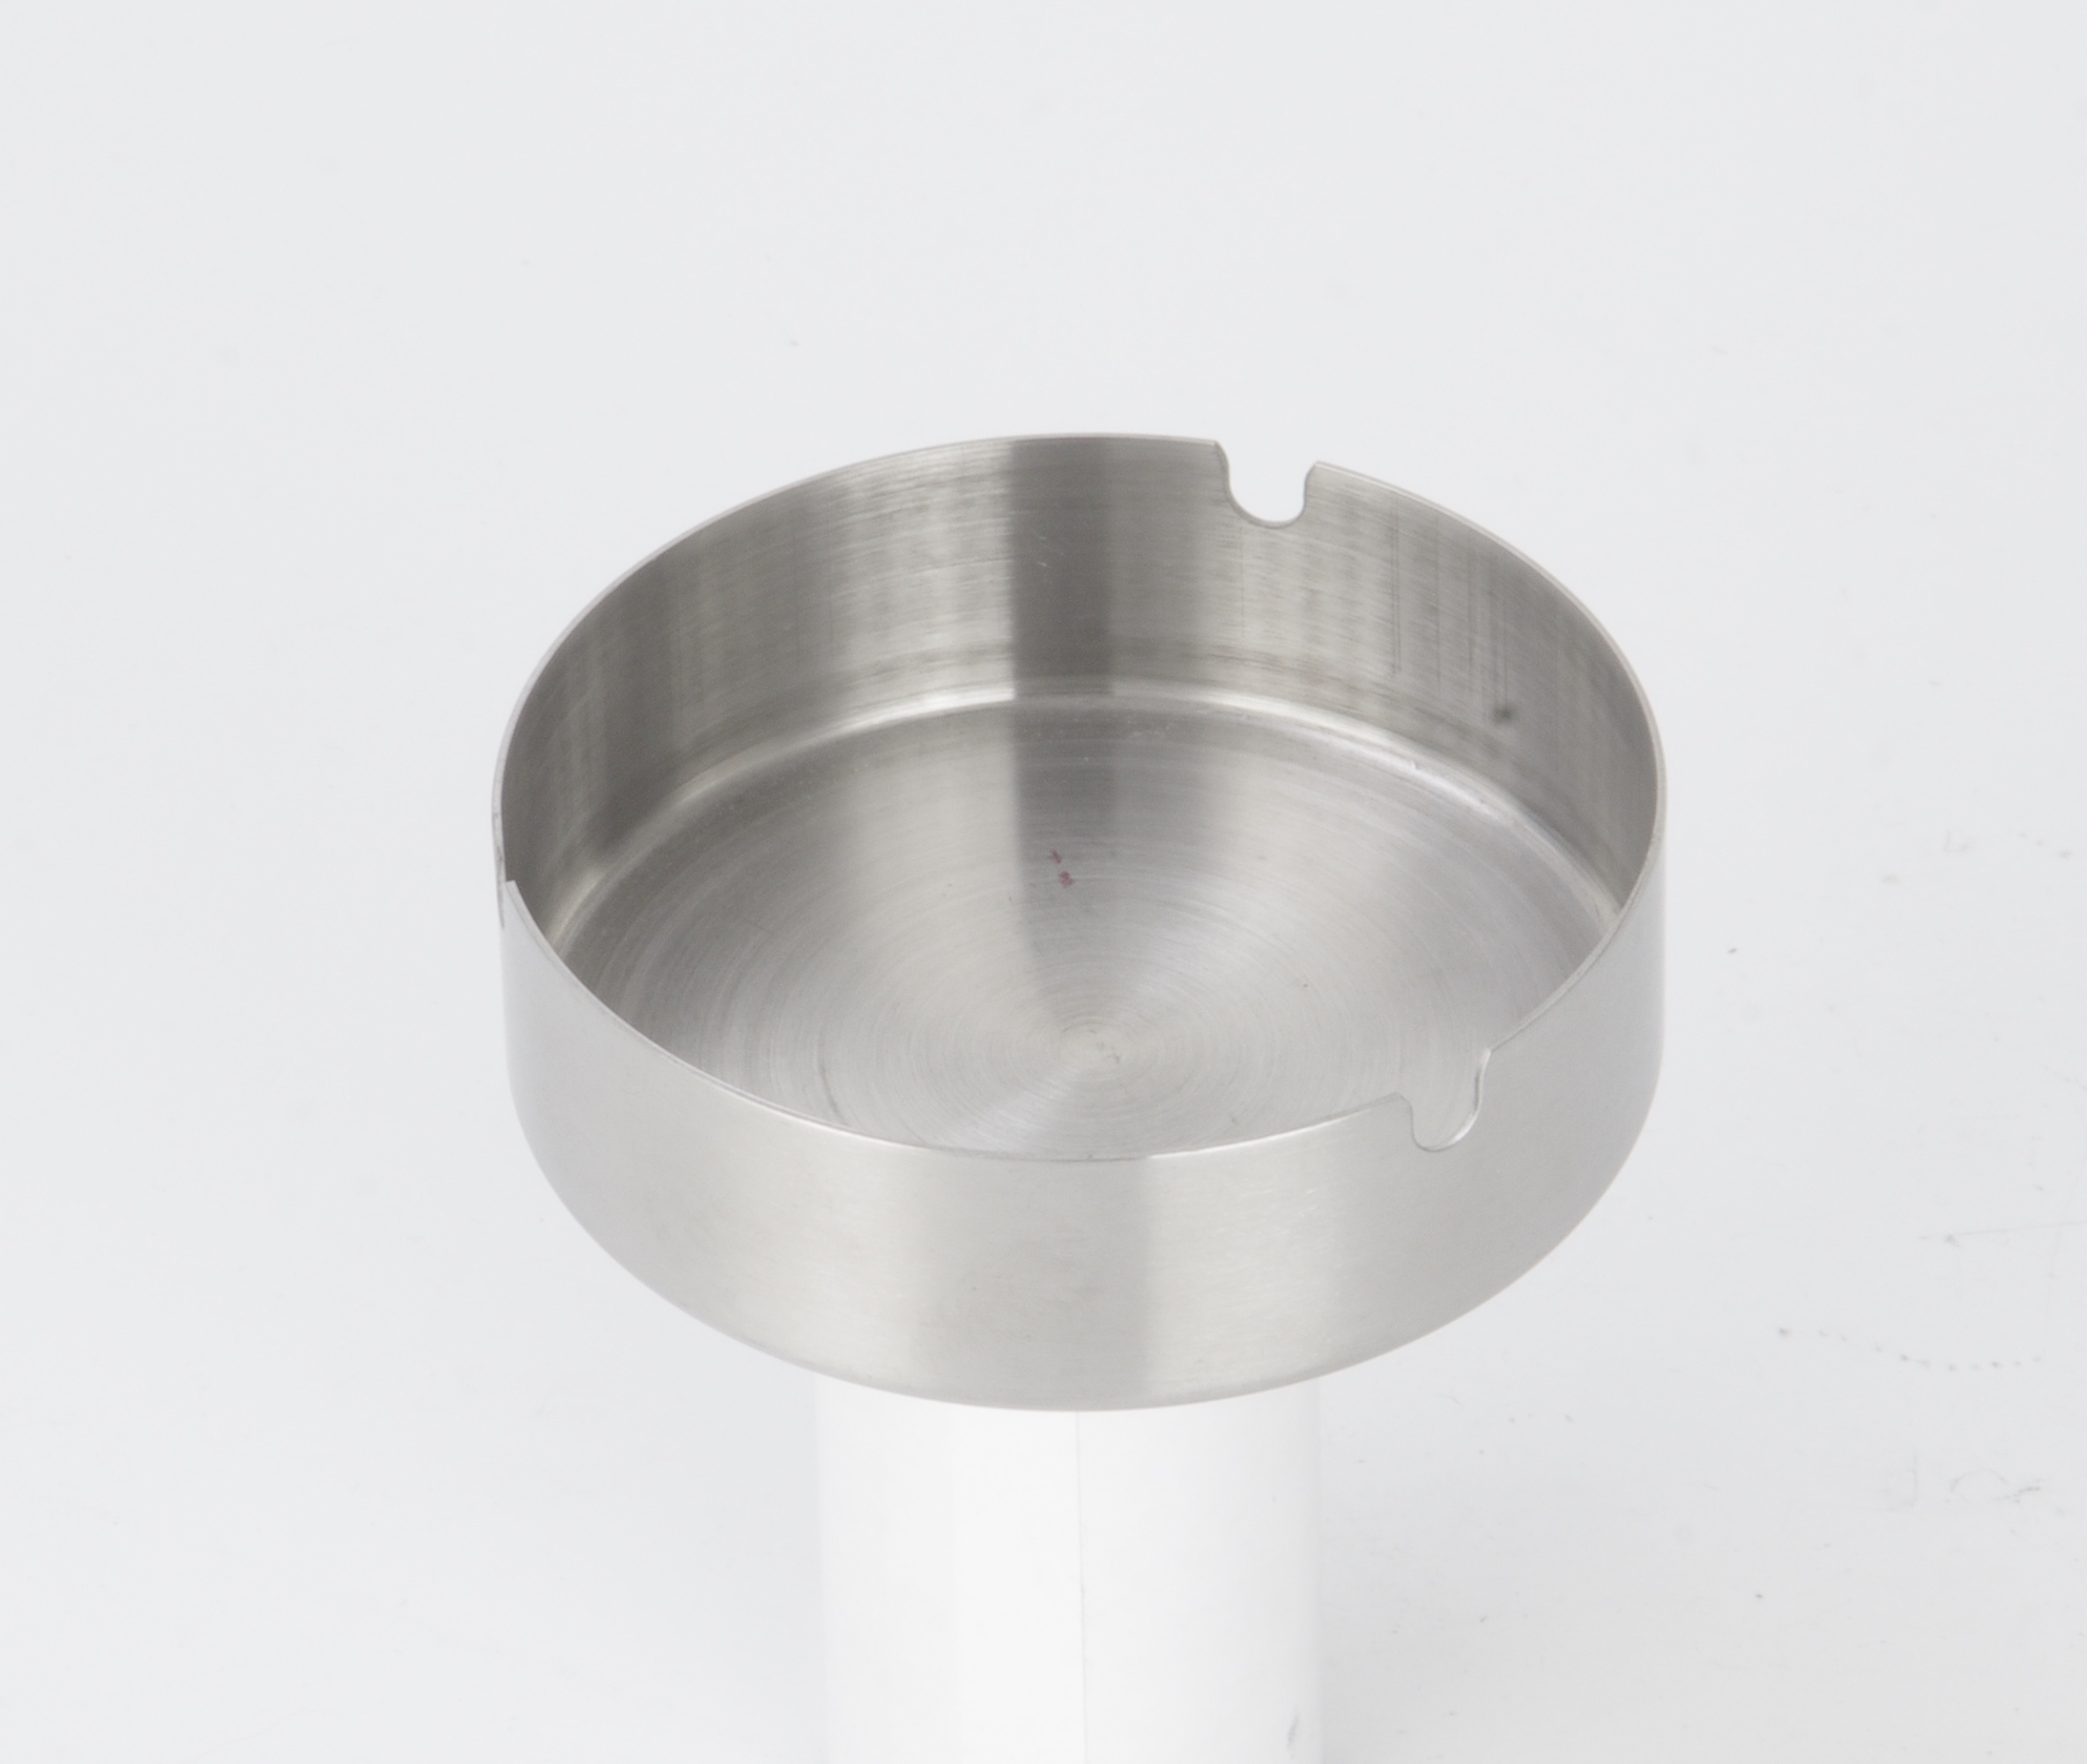 New stainless steel cigar ashtray company for kitchen